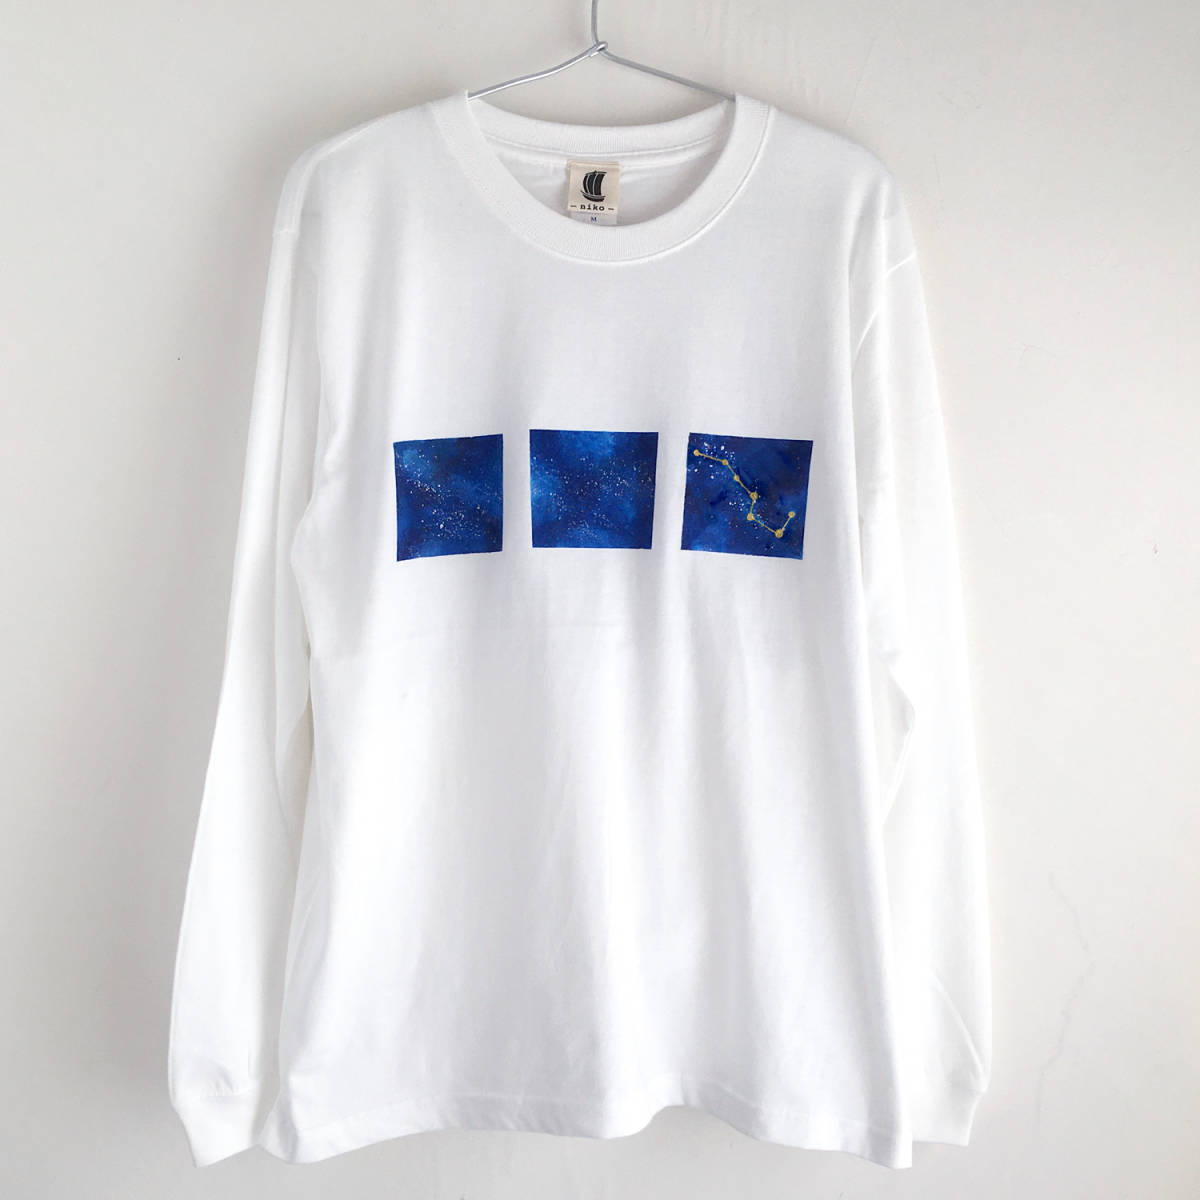 Big Dipper Pattern T-Shirt, White, S Size, Hand-painted Long Sleeve T-Shirt, Ribbed Sleeves, Long T-Shirt, Seven Stars, Space, T-shirt, long sleeve, S size